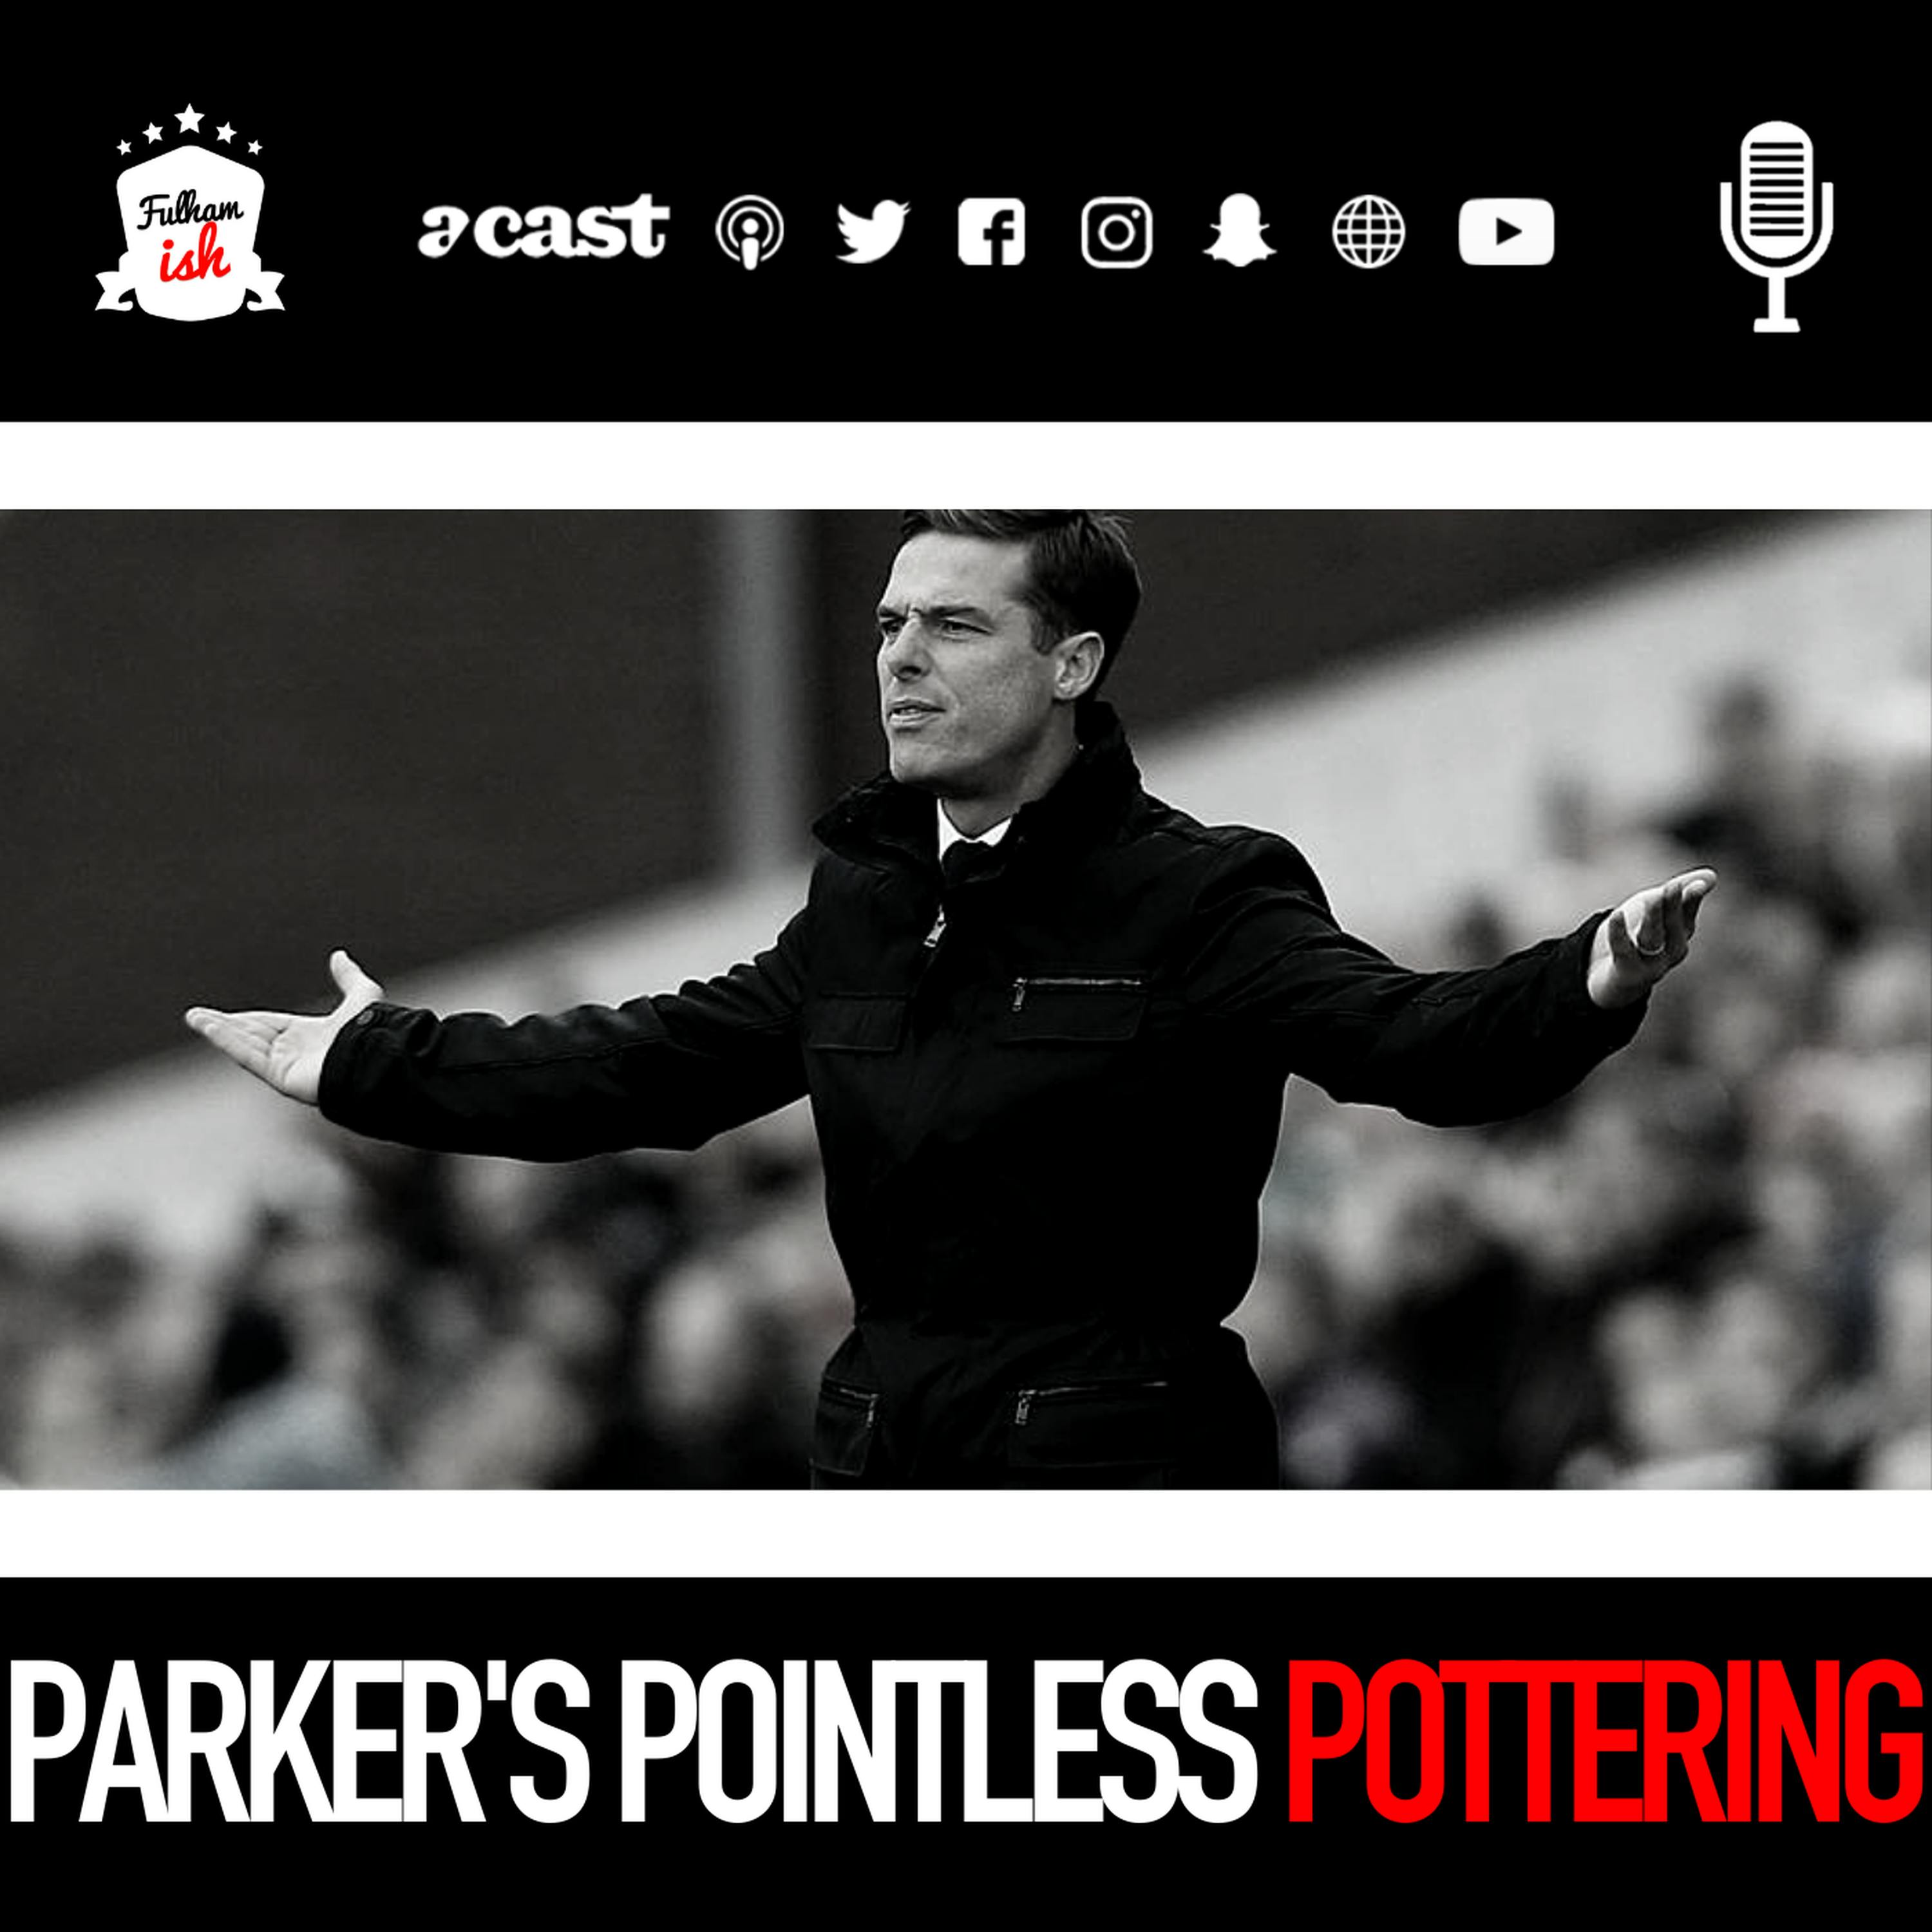 Parker's Pointless Pottering